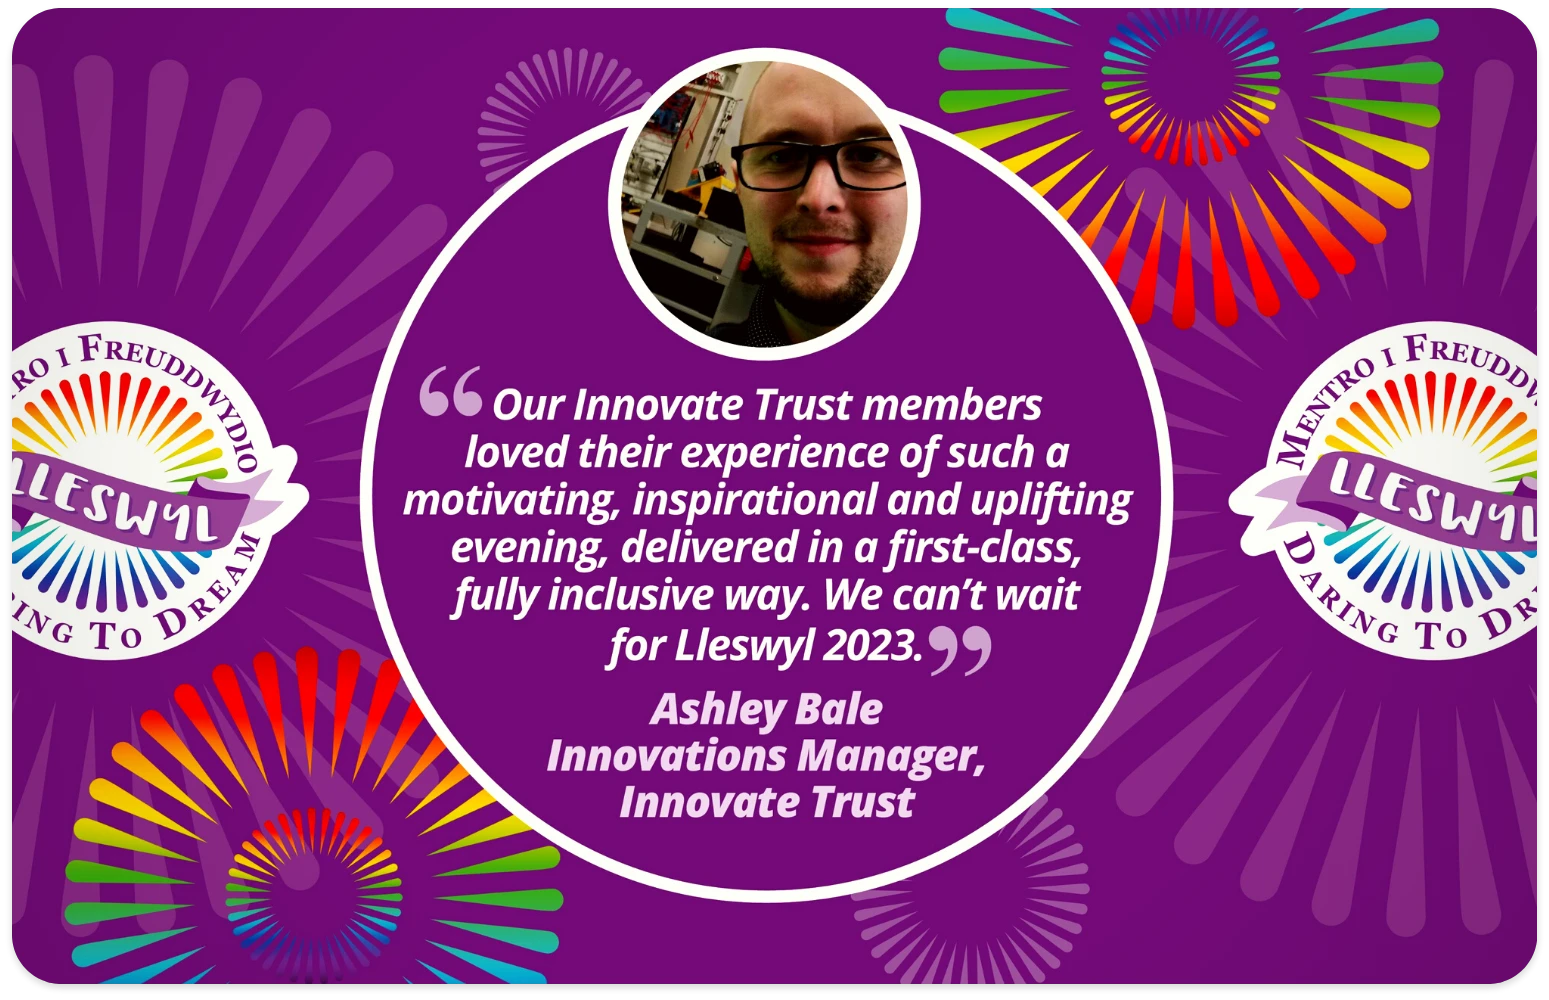 Llesywl Festival comment from Ashley Bale at Innovate Trust